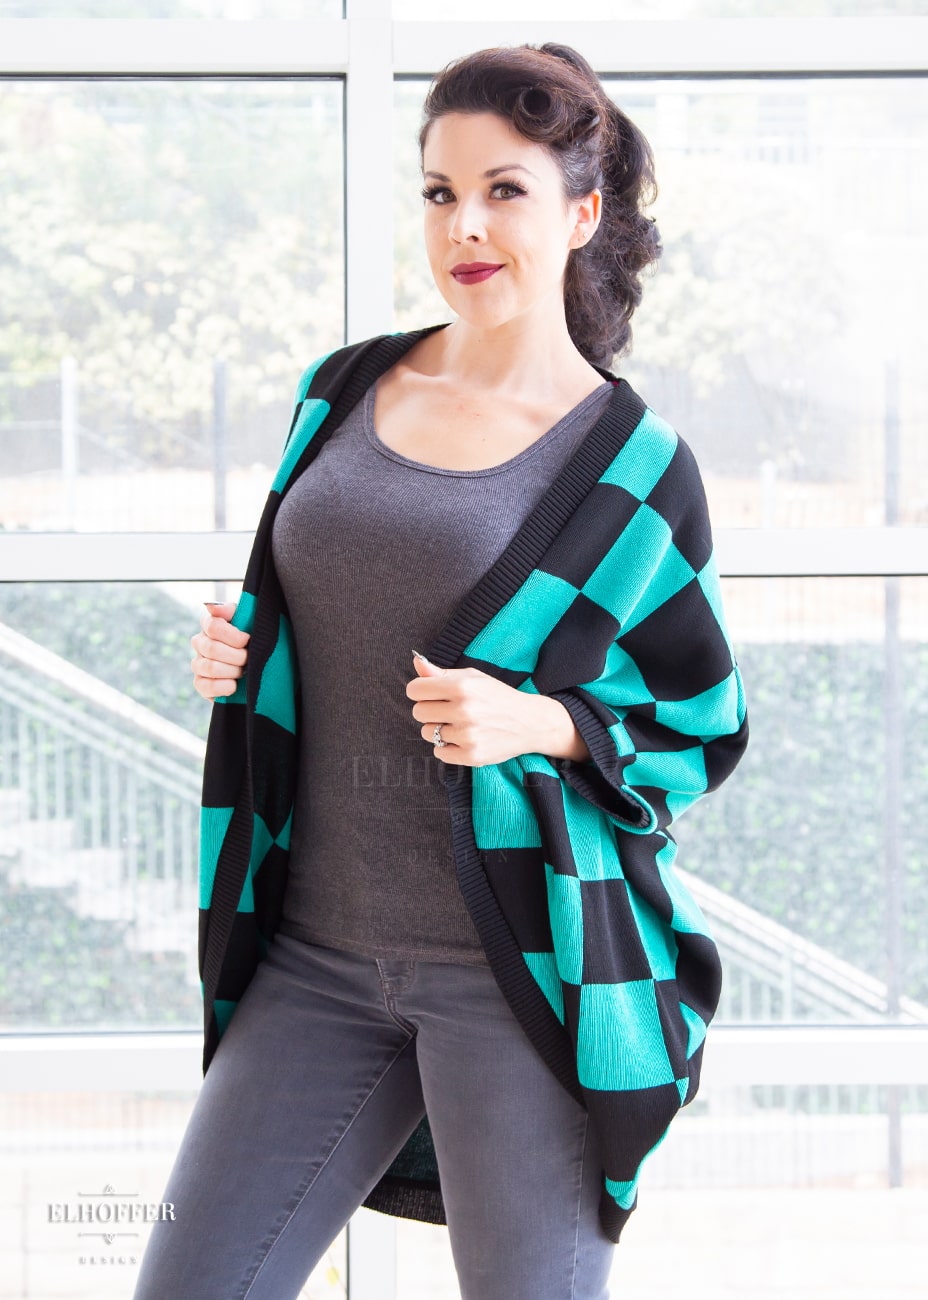 Kit, a fair skinned S model with long dark brown hair pulled back in a pony tail, is wearing a XL-3XL sample of a shrug with a black and green chessboard pattern. The shrug featured 3/4 sleeves and black ribbing along edges and cuffs. The XL-3XL sample is oversized on her, she would order the XS-L for a more fitted look.